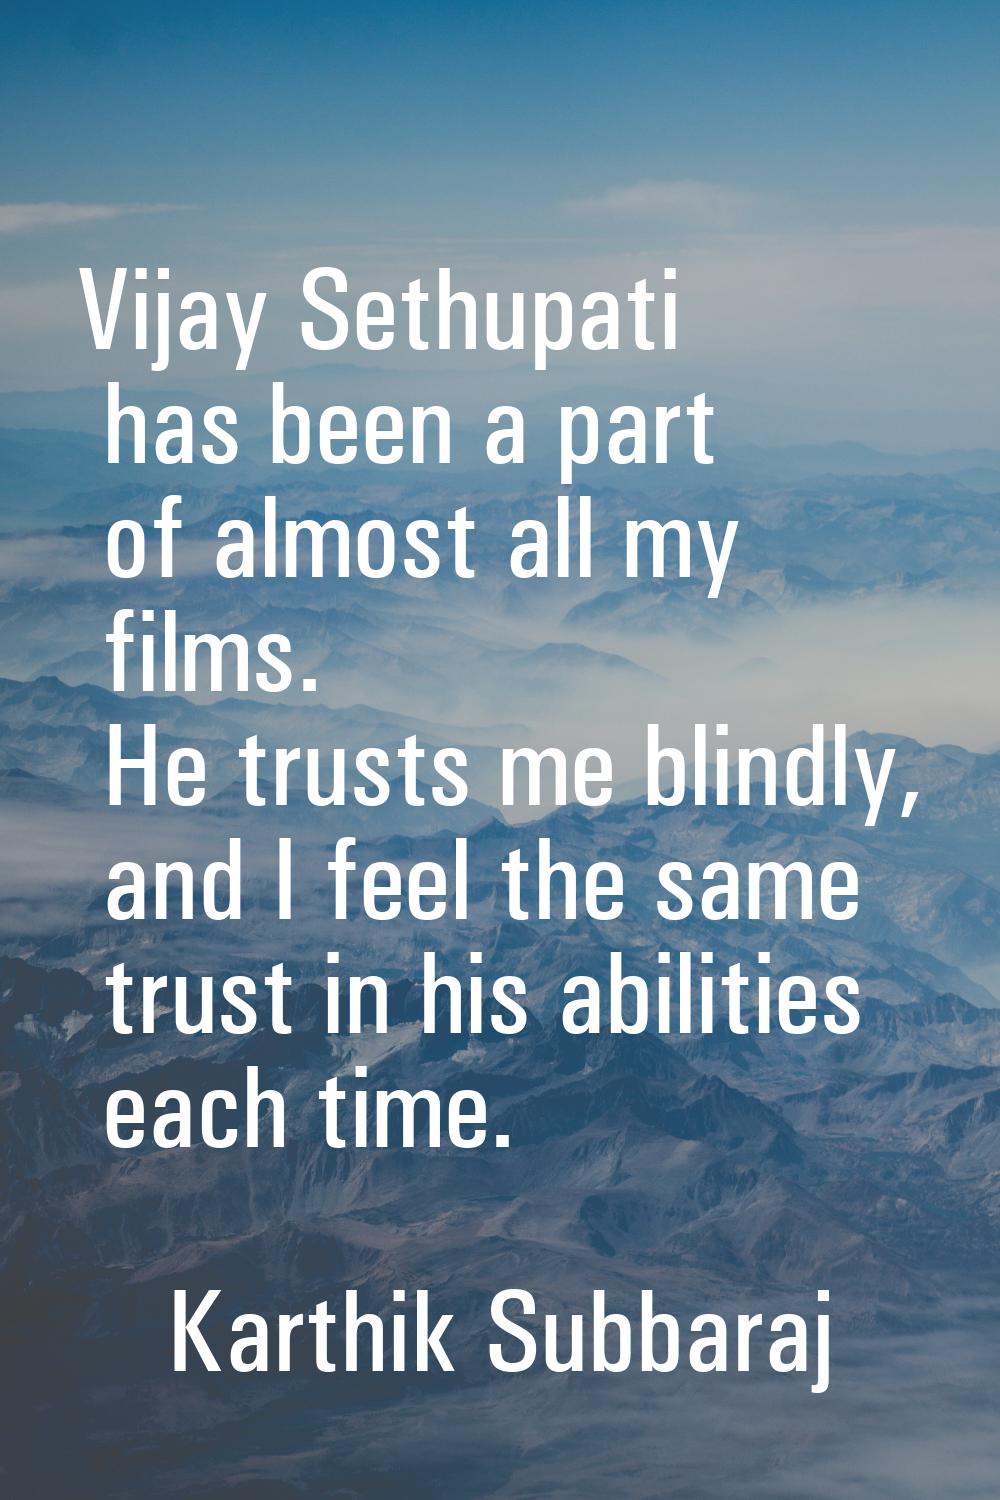 Vijay Sethupati has been a part of almost all my films. He trusts me blindly, and I feel the same t